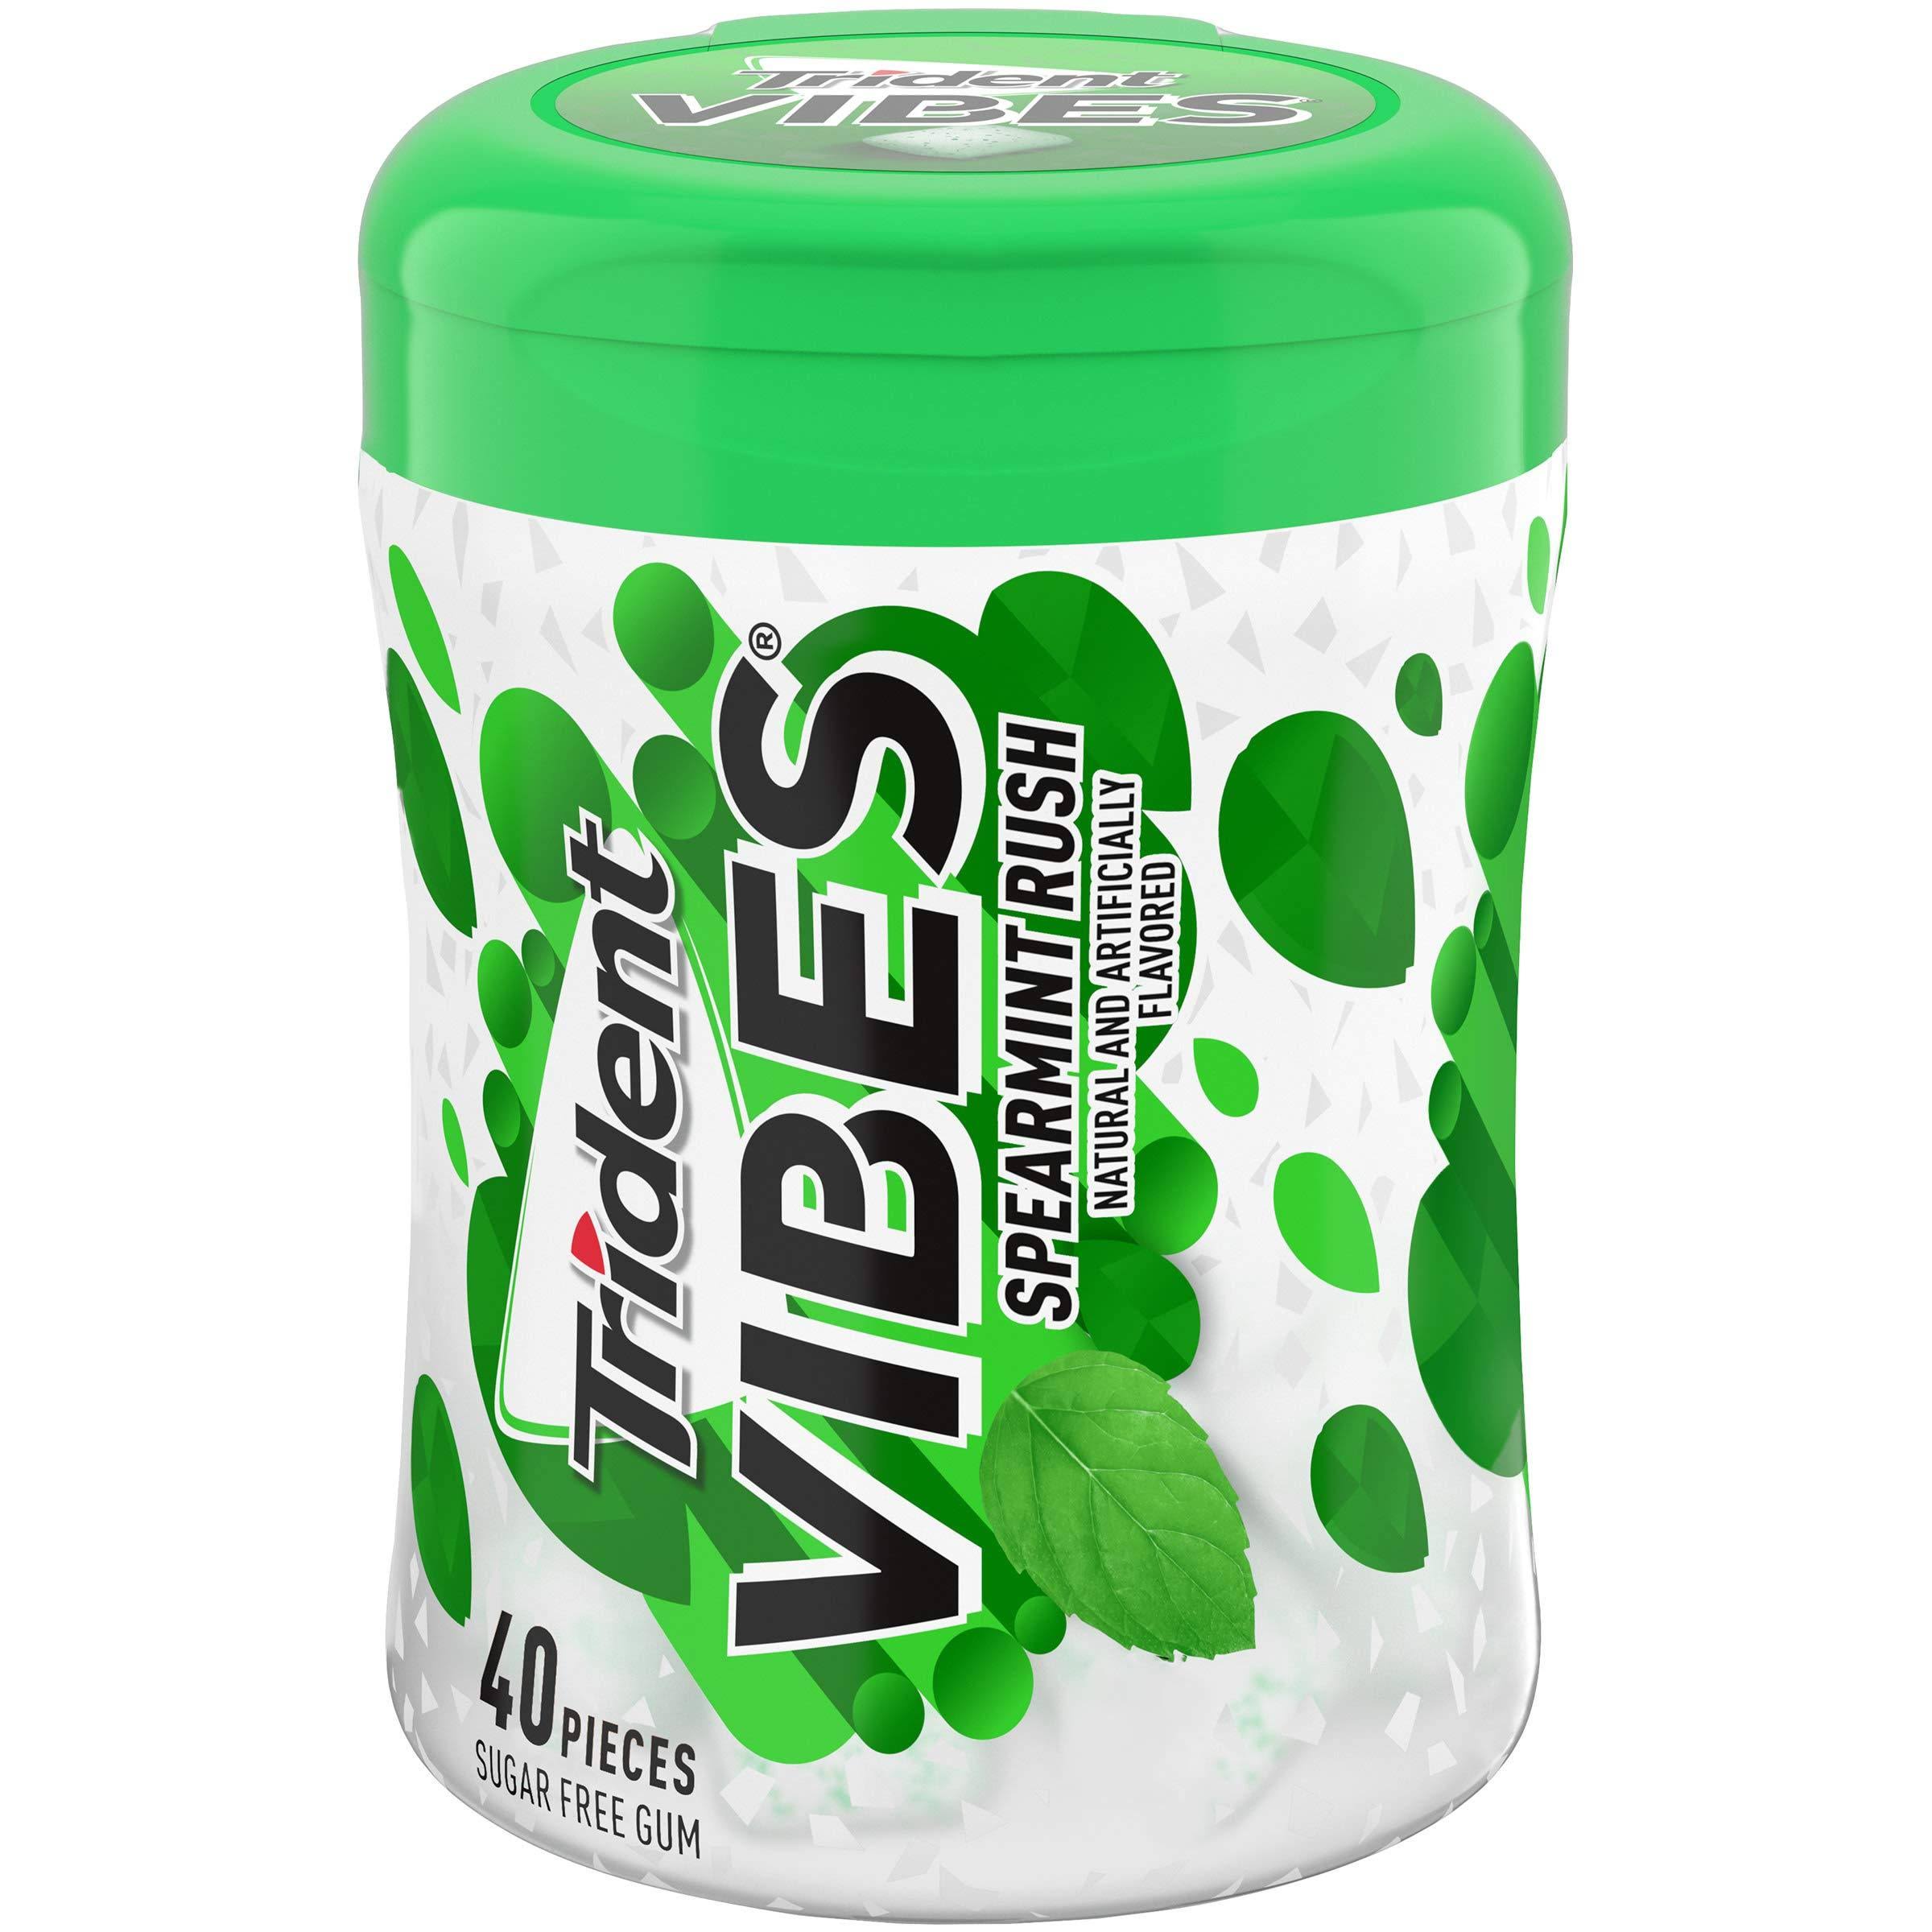 Trident Vibes Sugar-Free Chewing Gum - Spearmint Rush, 40ct